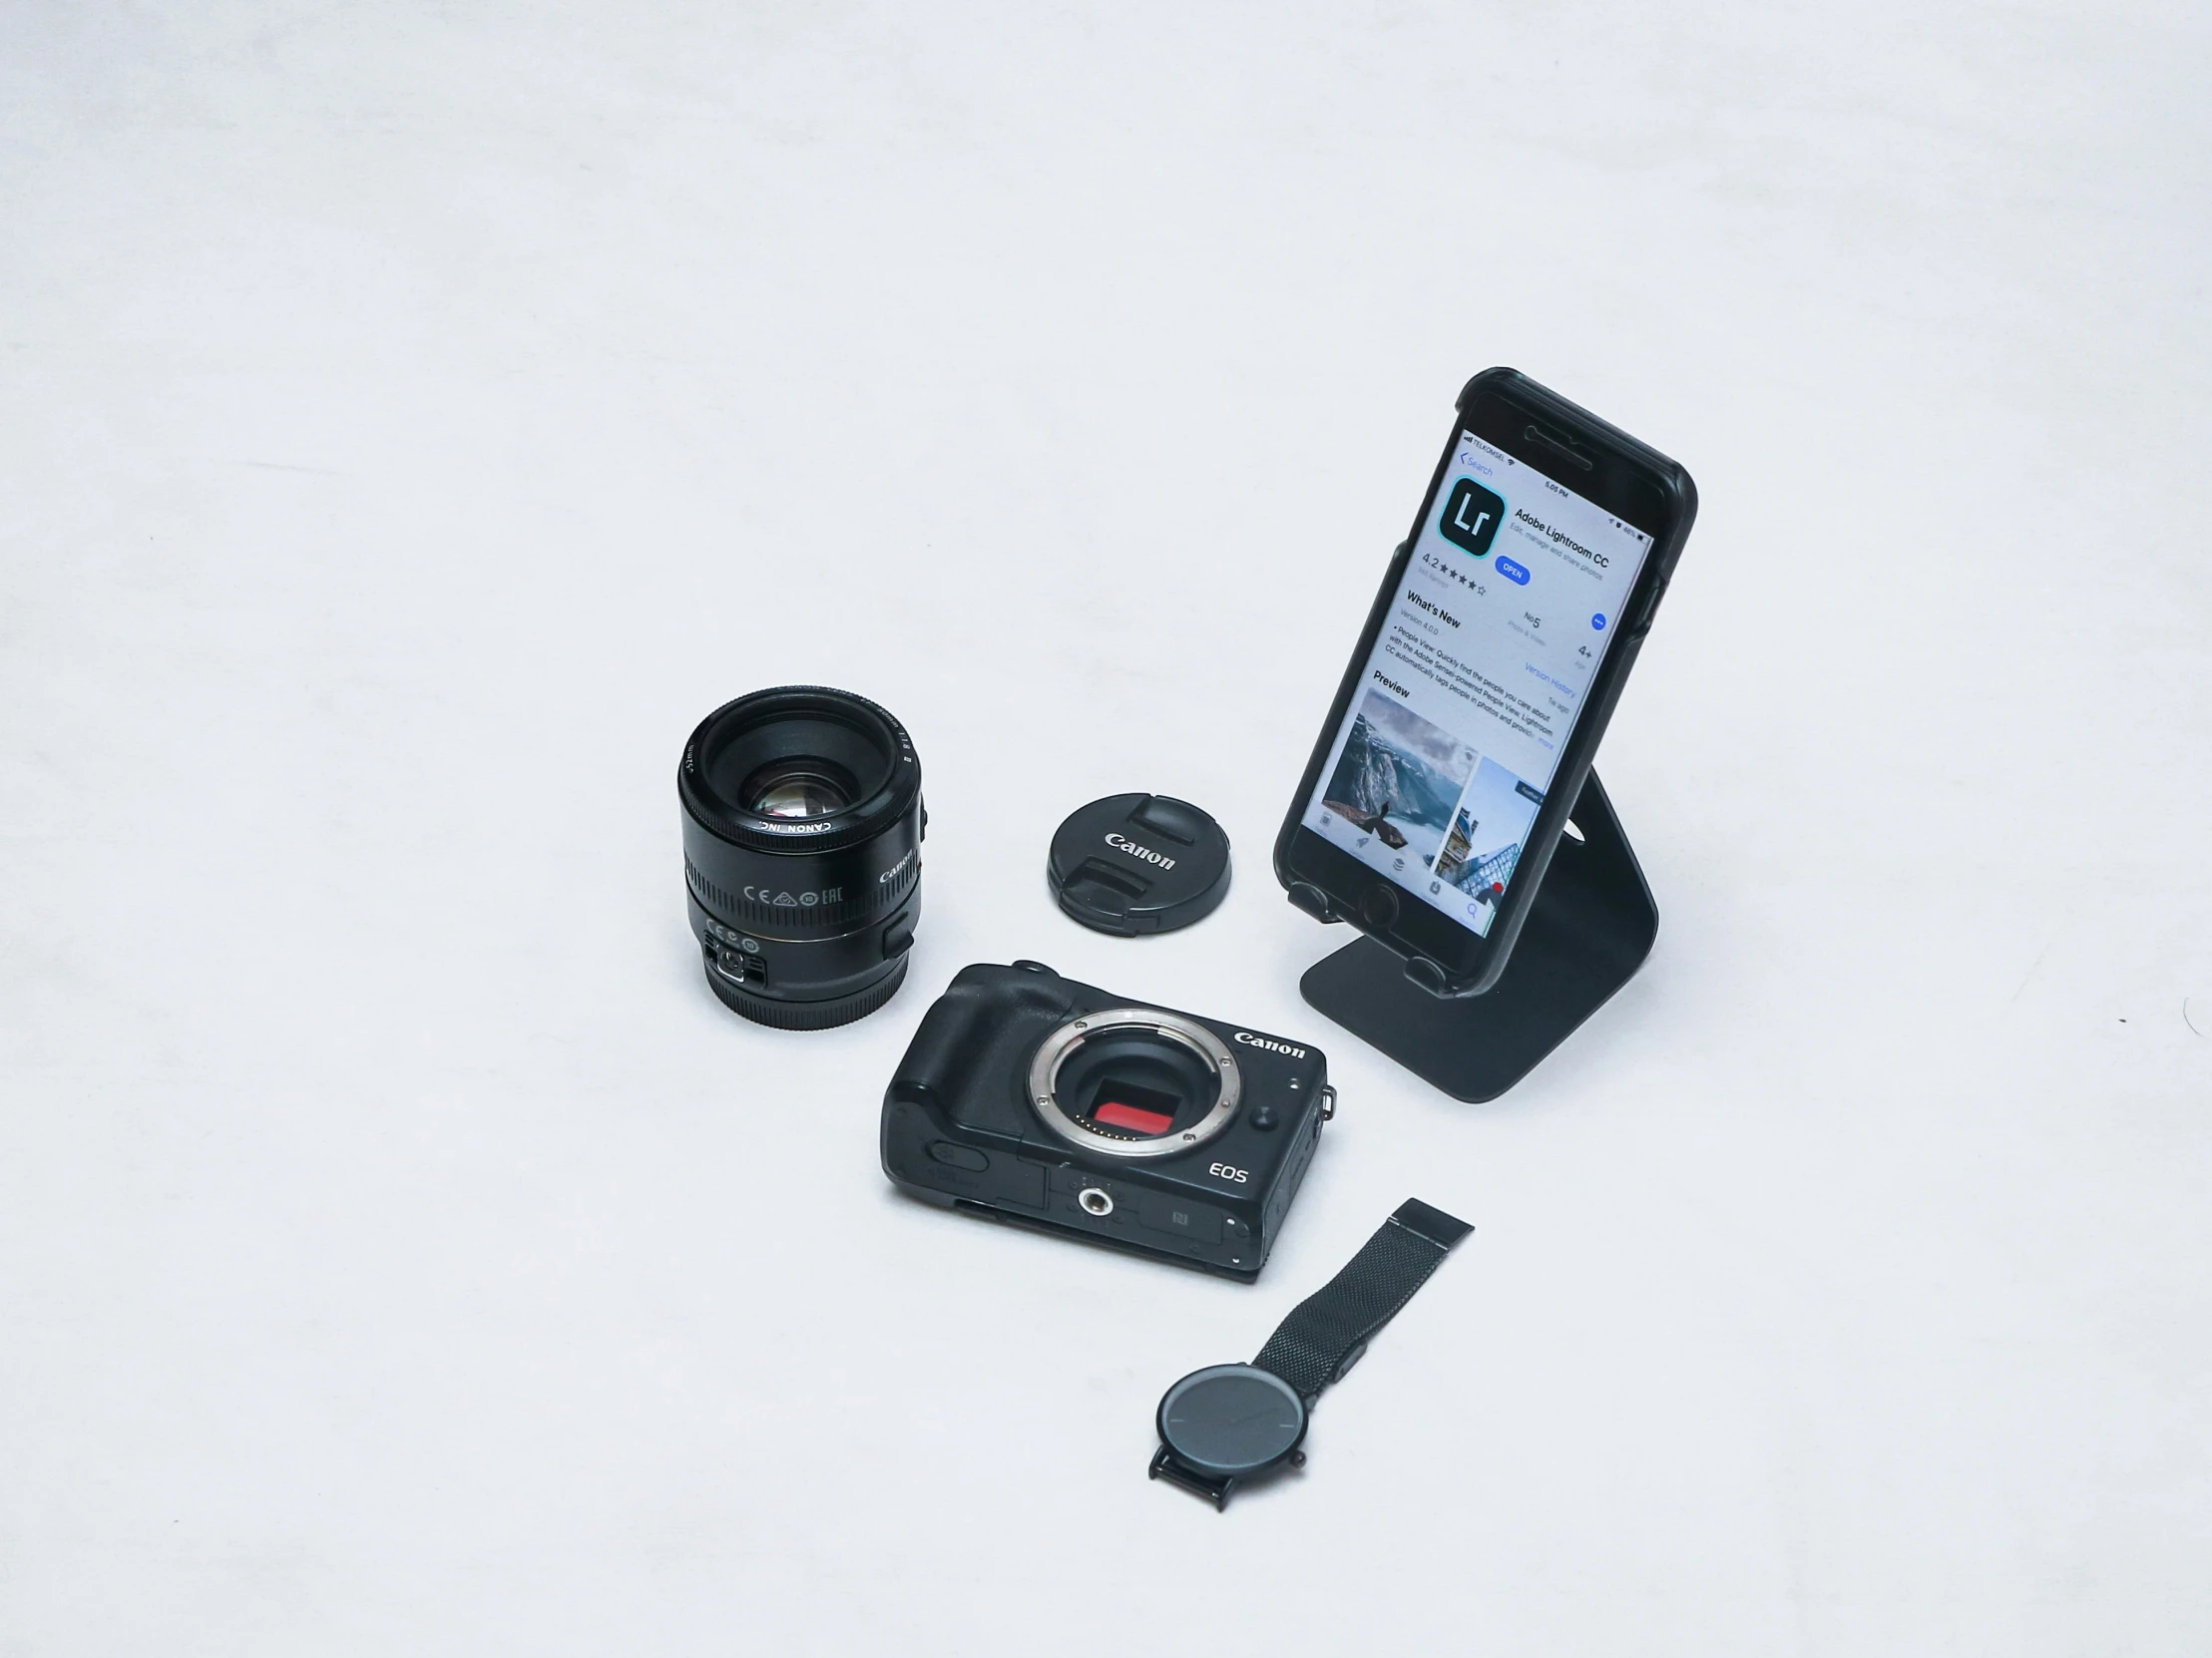 a camera and lens on a table with another object